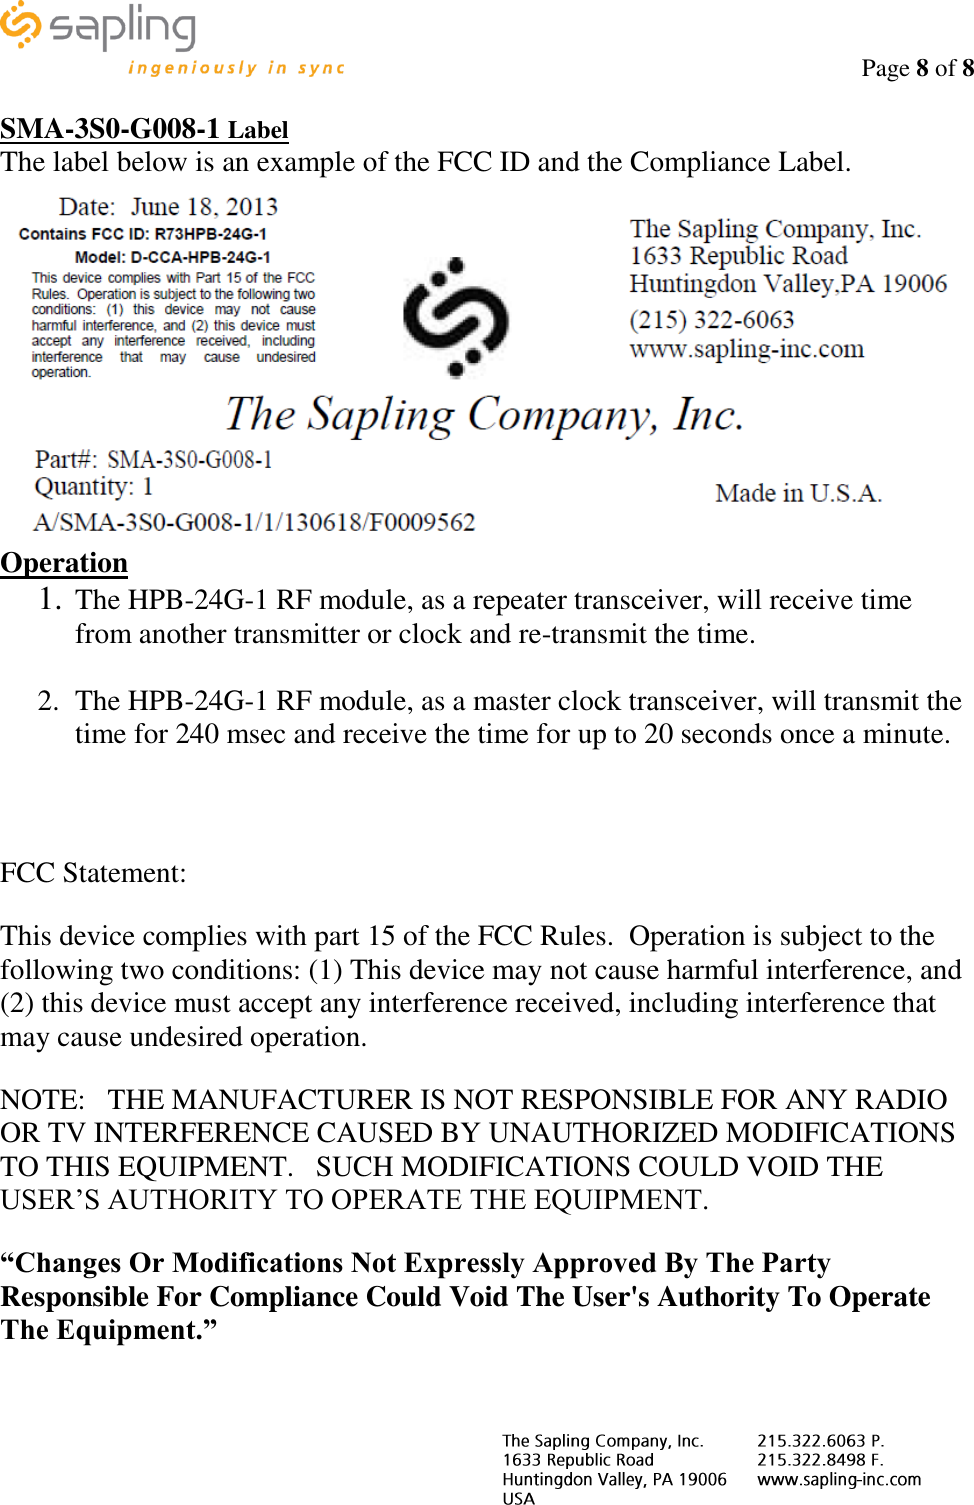                                                                                    Page 8 of 8     SMA-3S0-G008-1 Label The label below is an example of the FCC ID and the Compliance Label.  Operation 1. The HPB-24G-1 RF module, as a repeater transceiver, will receive time from another transmitter or clock and re-transmit the time.  2. The HPB-24G-1 RF module, as a master clock transceiver, will transmit the time for 240 msec and receive the time for up to 20 seconds once a minute.   FCC Statement: This device complies with part 15 of the FCC Rules.  Operation is subject to the following two conditions: (1) This device may not cause harmful interference, and (2) this device must accept any interference received, including interference that may cause undesired operation. NOTE:   THE MANUFACTURER IS NOT RESPONSIBLE FOR ANY RADIO OR TV INTERFERENCE CAUSED BY UNAUTHORIZED MODIFICATIONS TO THIS EQUIPMENT.   SUCH MODIFICATIONS COULD VOID THE USER’S AUTHORITY TO OPERATE THE EQUIPMENT. “Changes Or Modifications Not Expressly Approved By The Party Responsible For Compliance Could Void The User&apos;s Authority To Operate The Equipment.”  